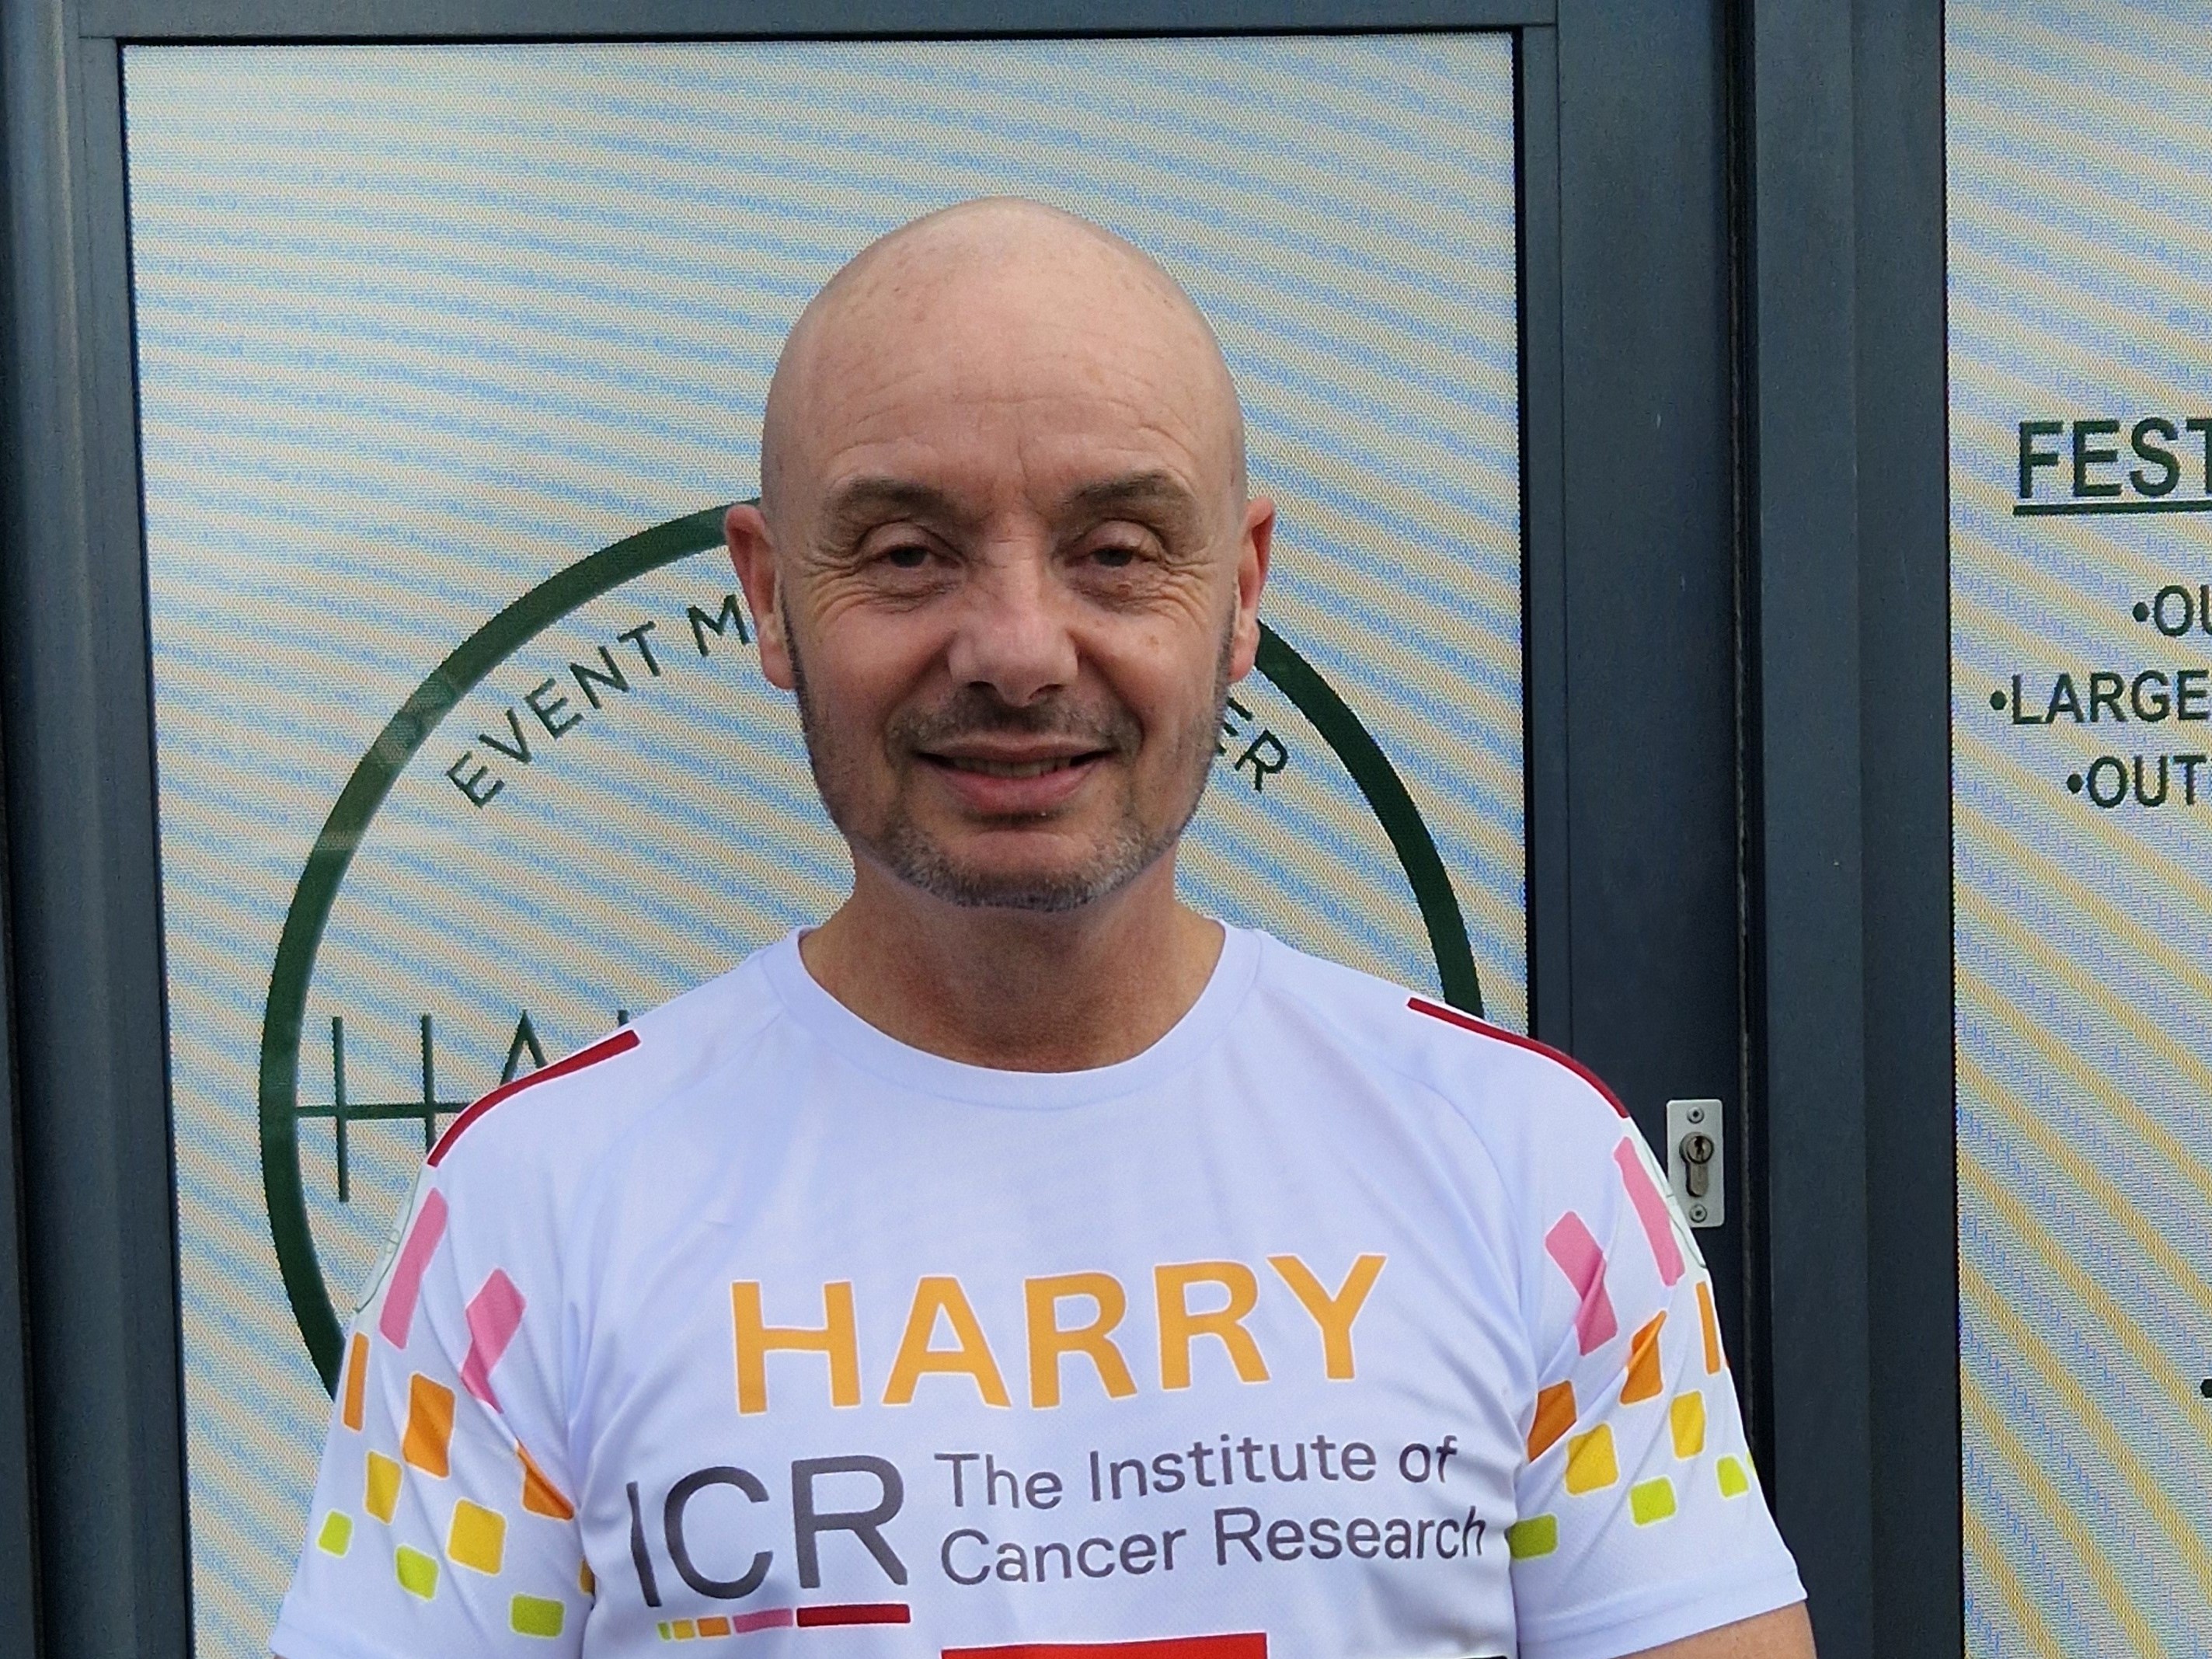 Harry wearing an ICR running vest, smiles for the camera